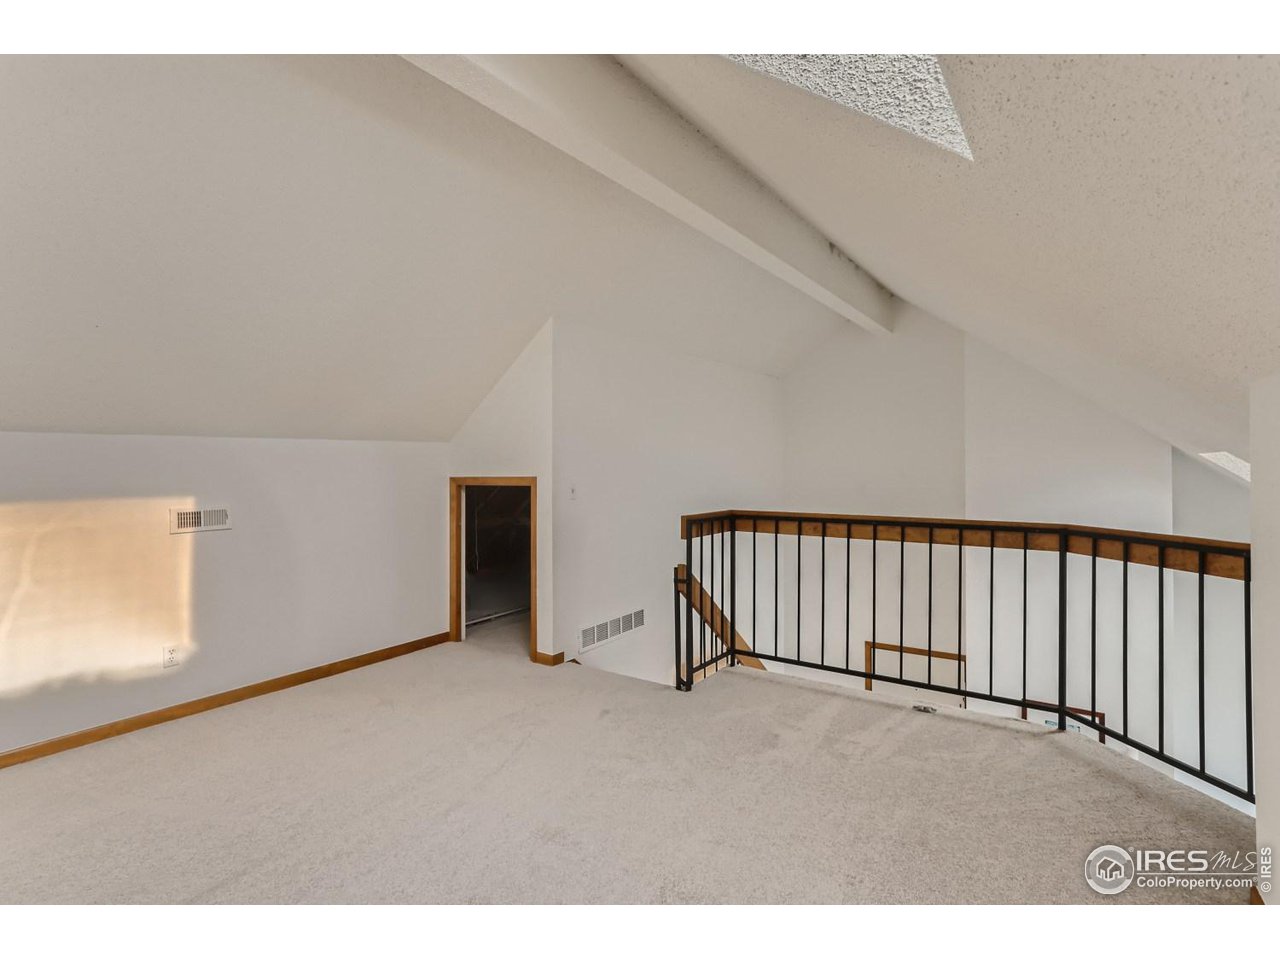 Large loft space, looking to additional storage and HVAC area.